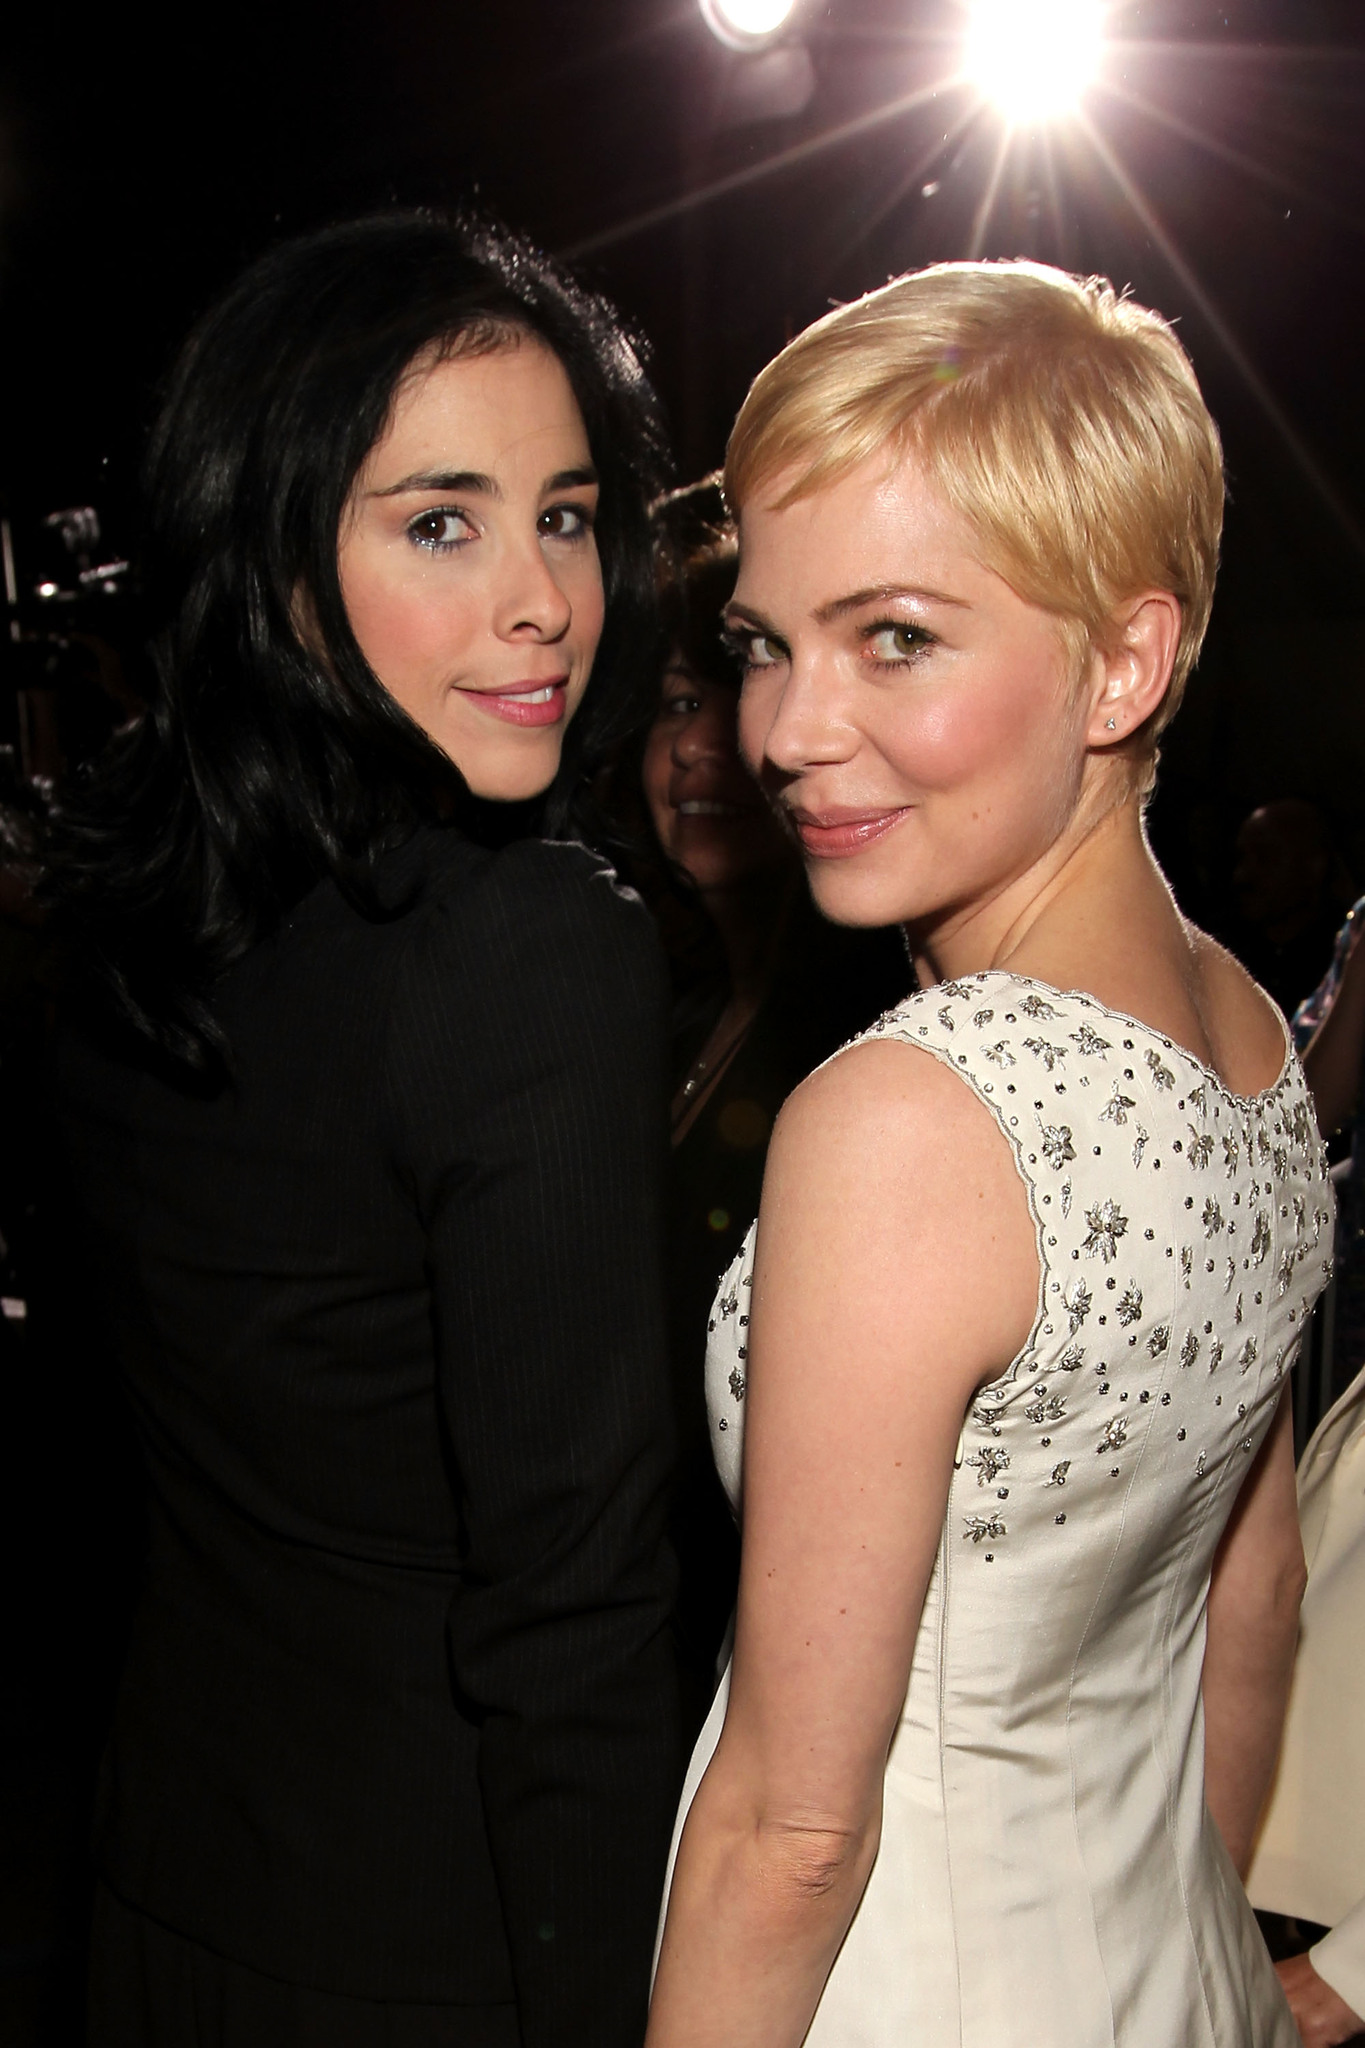 Sarah Silverman and Michelle Williams